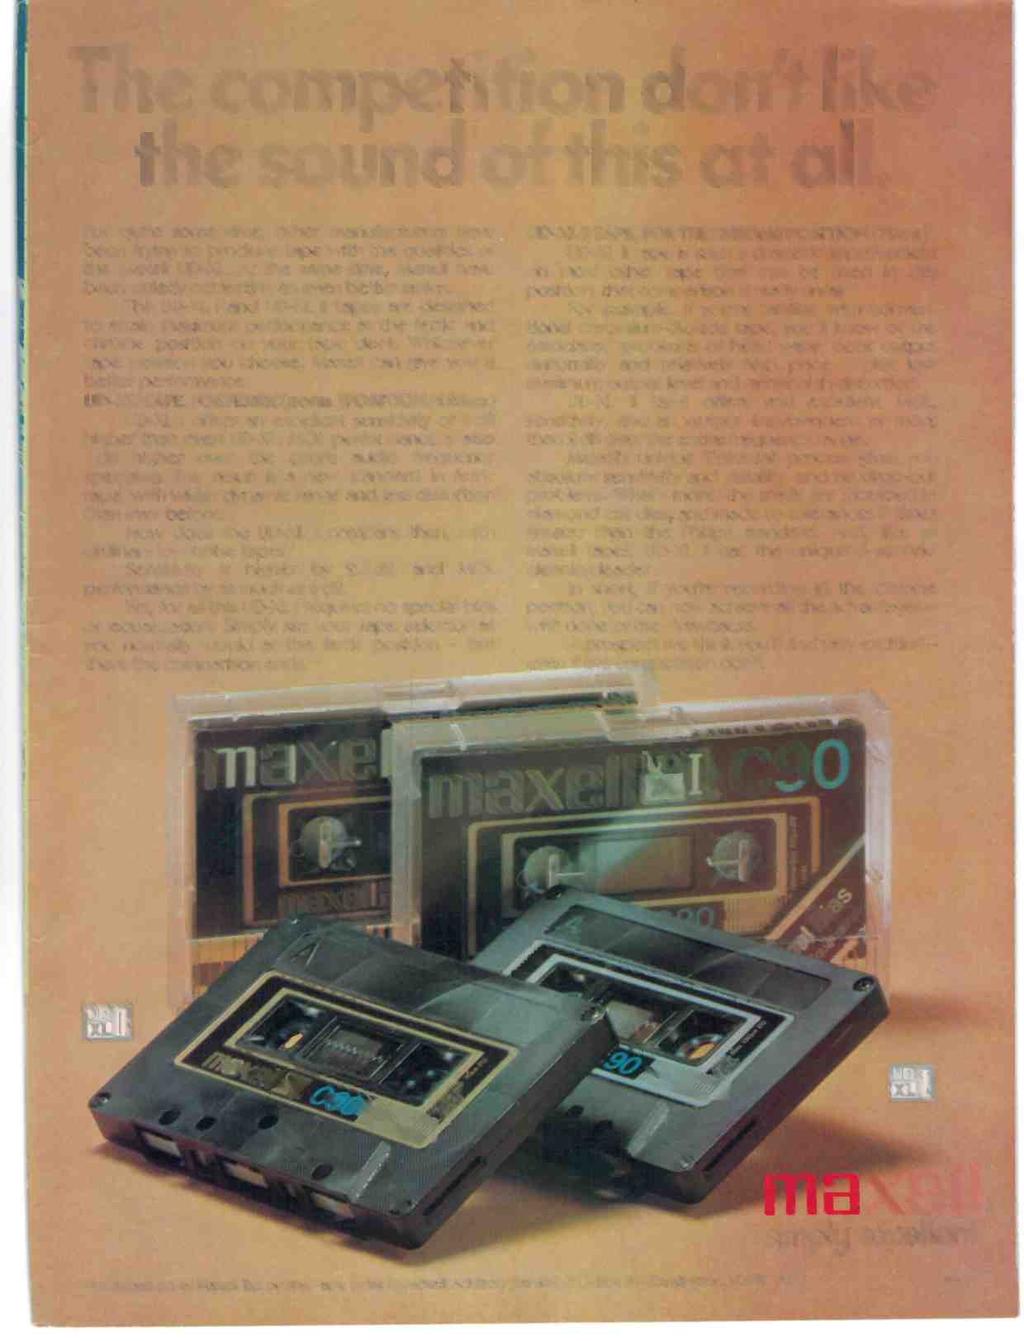 The competition don't like the sound of this at all. For quite some time, other manufacturers have been trying to produce tape with the qualities of the Maxell UD-XL.